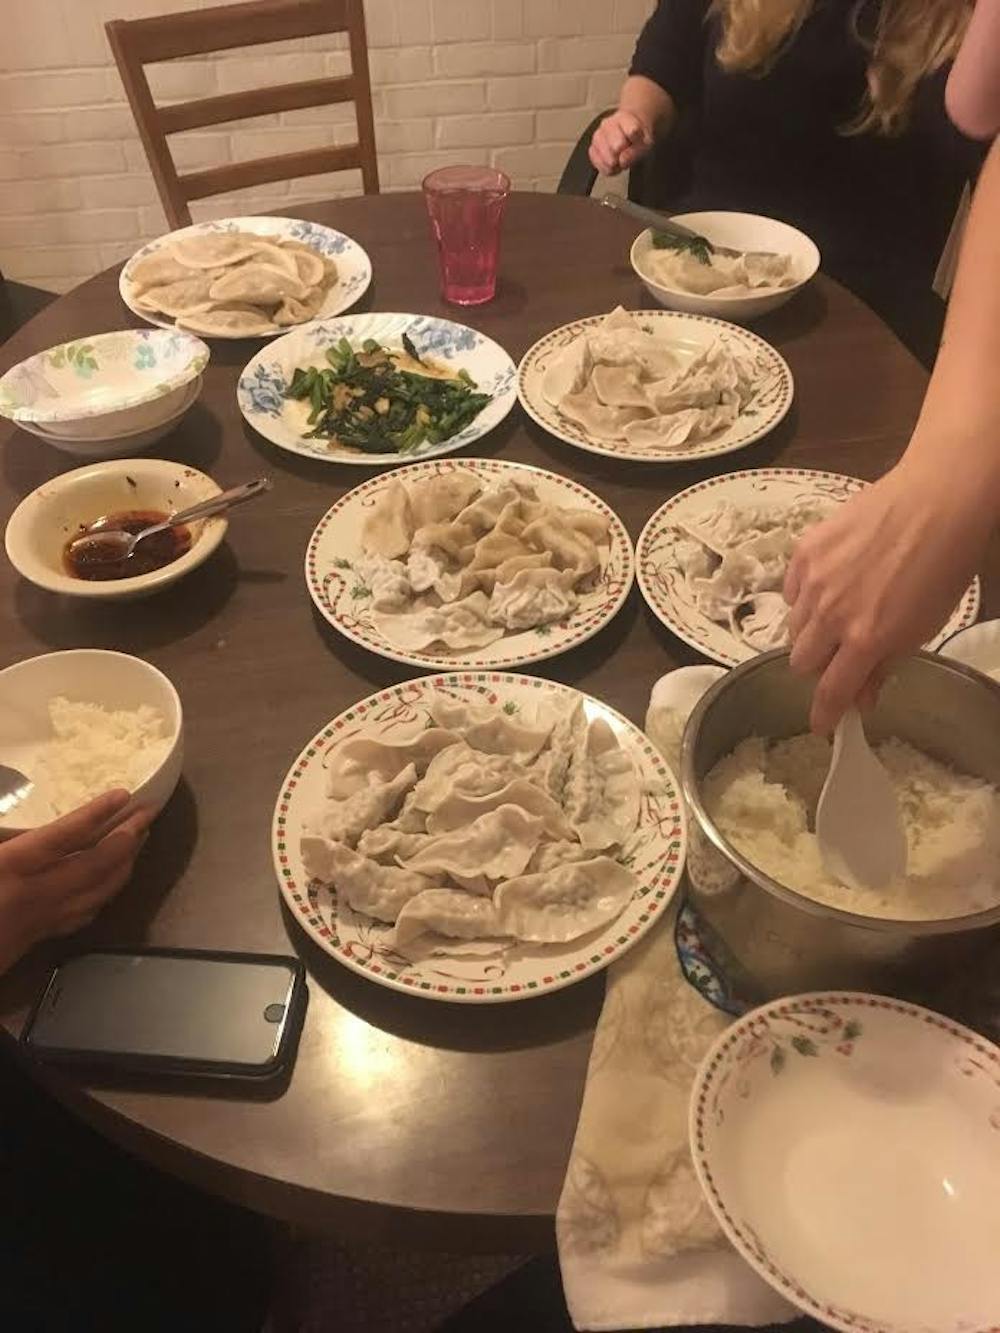 Courtesy of Rollin Hu
With a few friends and an evening of chopping, you too can enjoy dumplings.